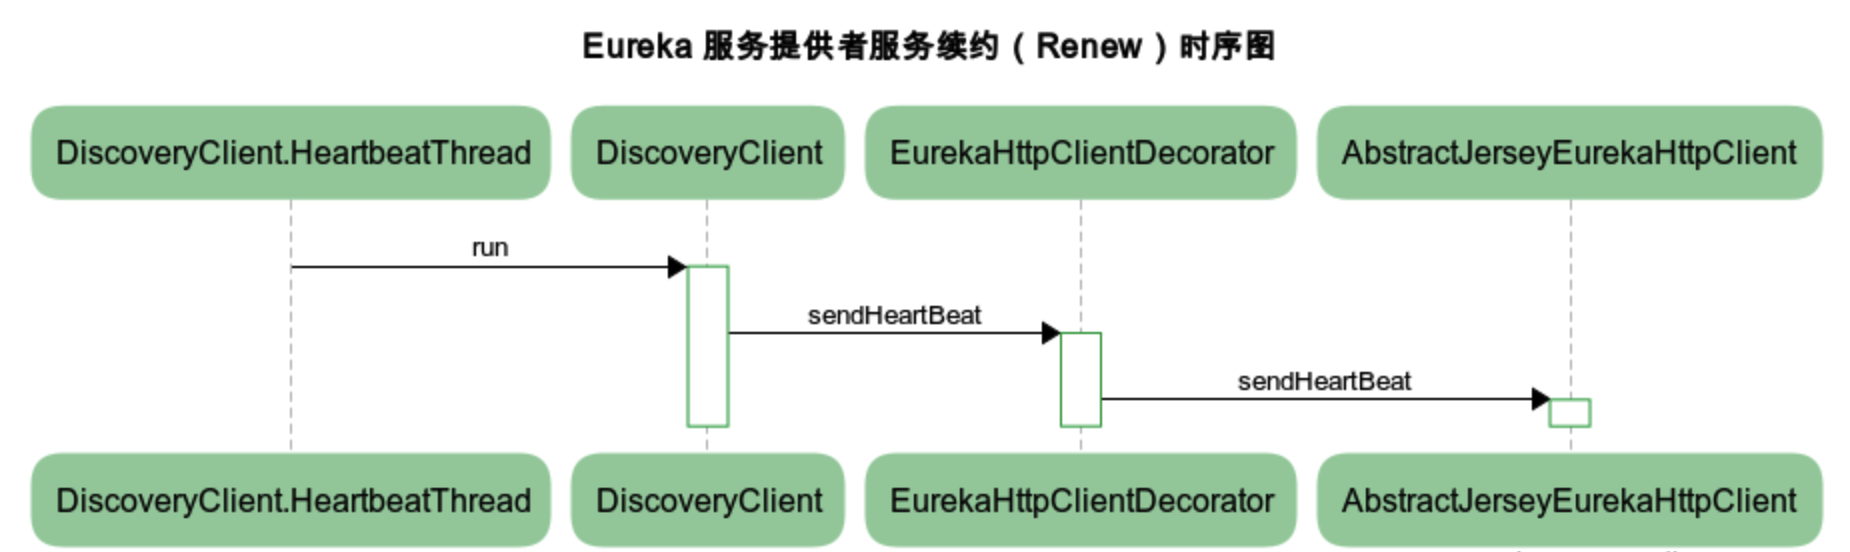 images/eureka-service-provider-renew-sequence-chart.png